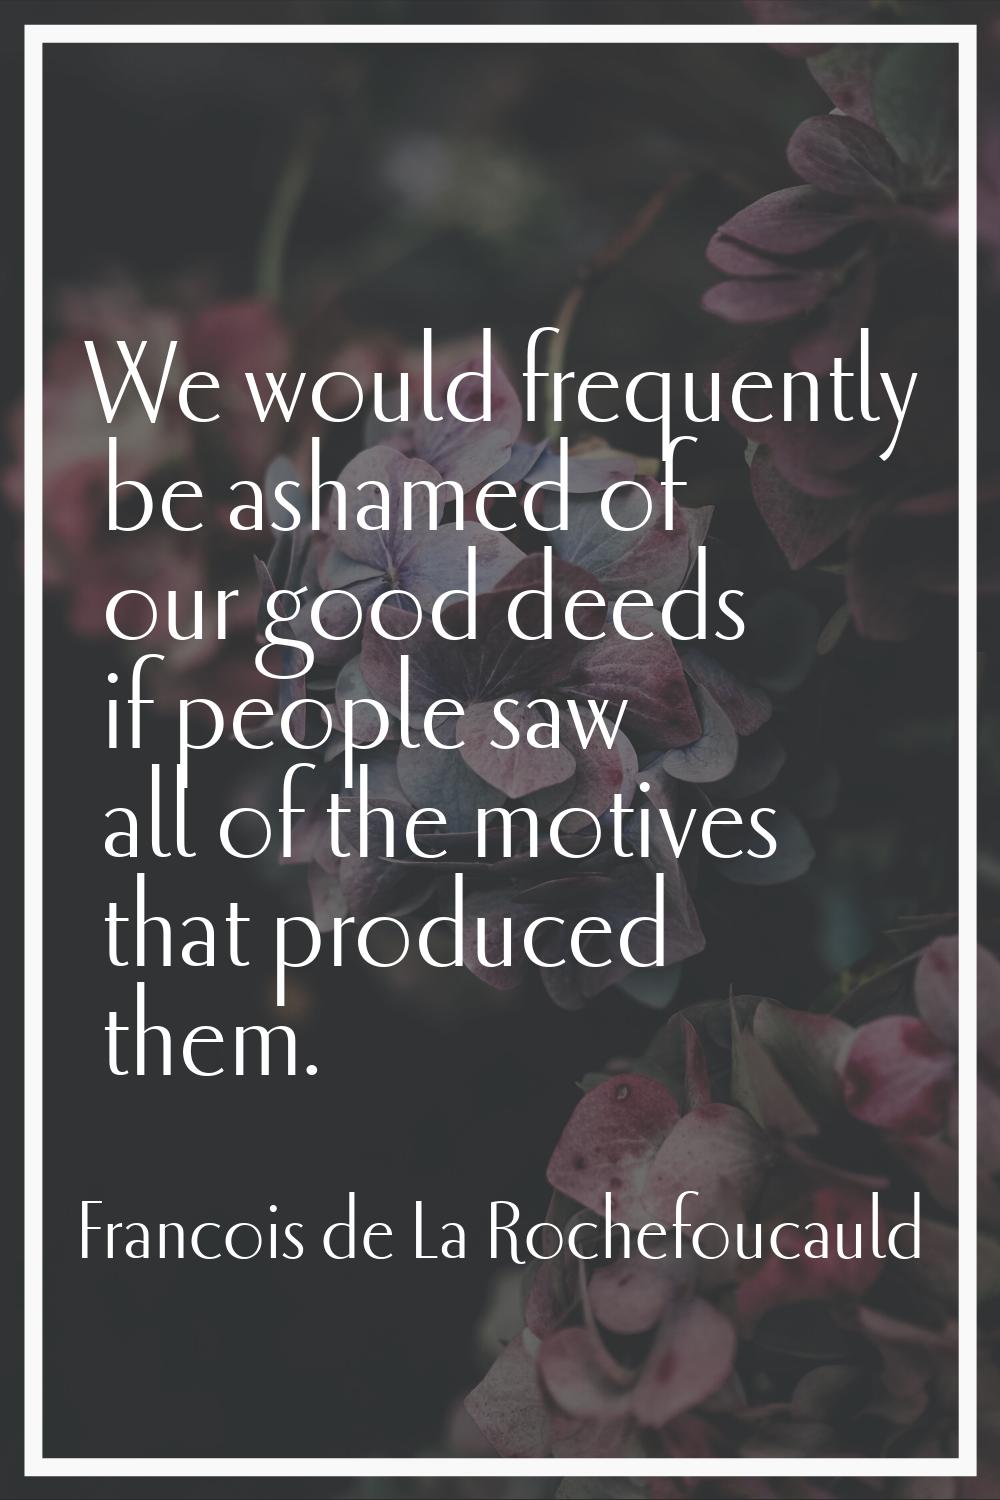 We would frequently be ashamed of our good deeds if people saw all of the motives that produced the